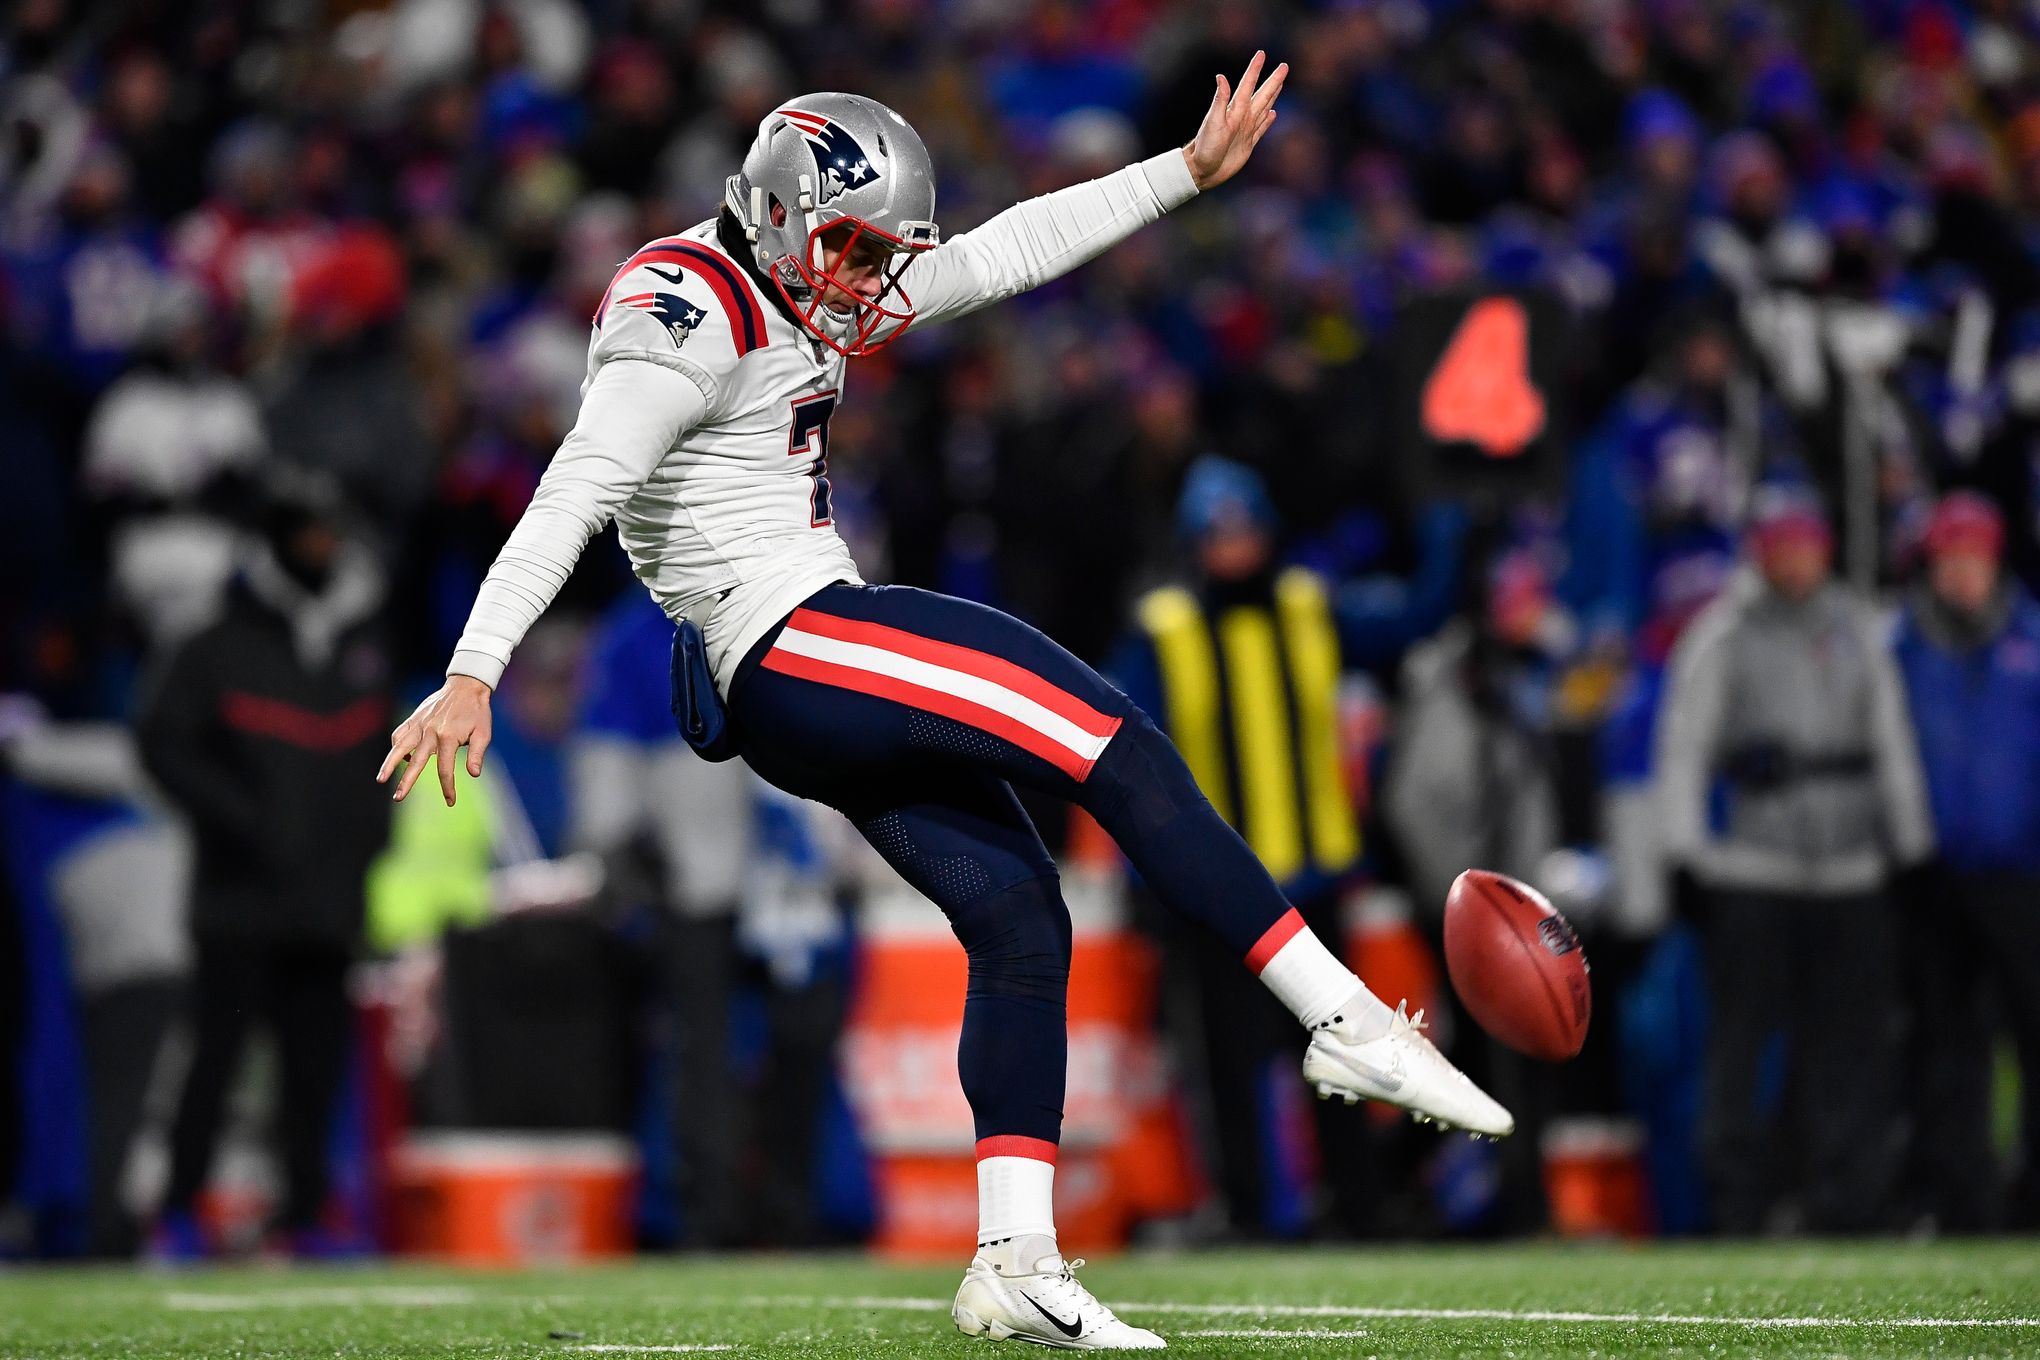 Patriots sign punter Bailey to 4-year contract